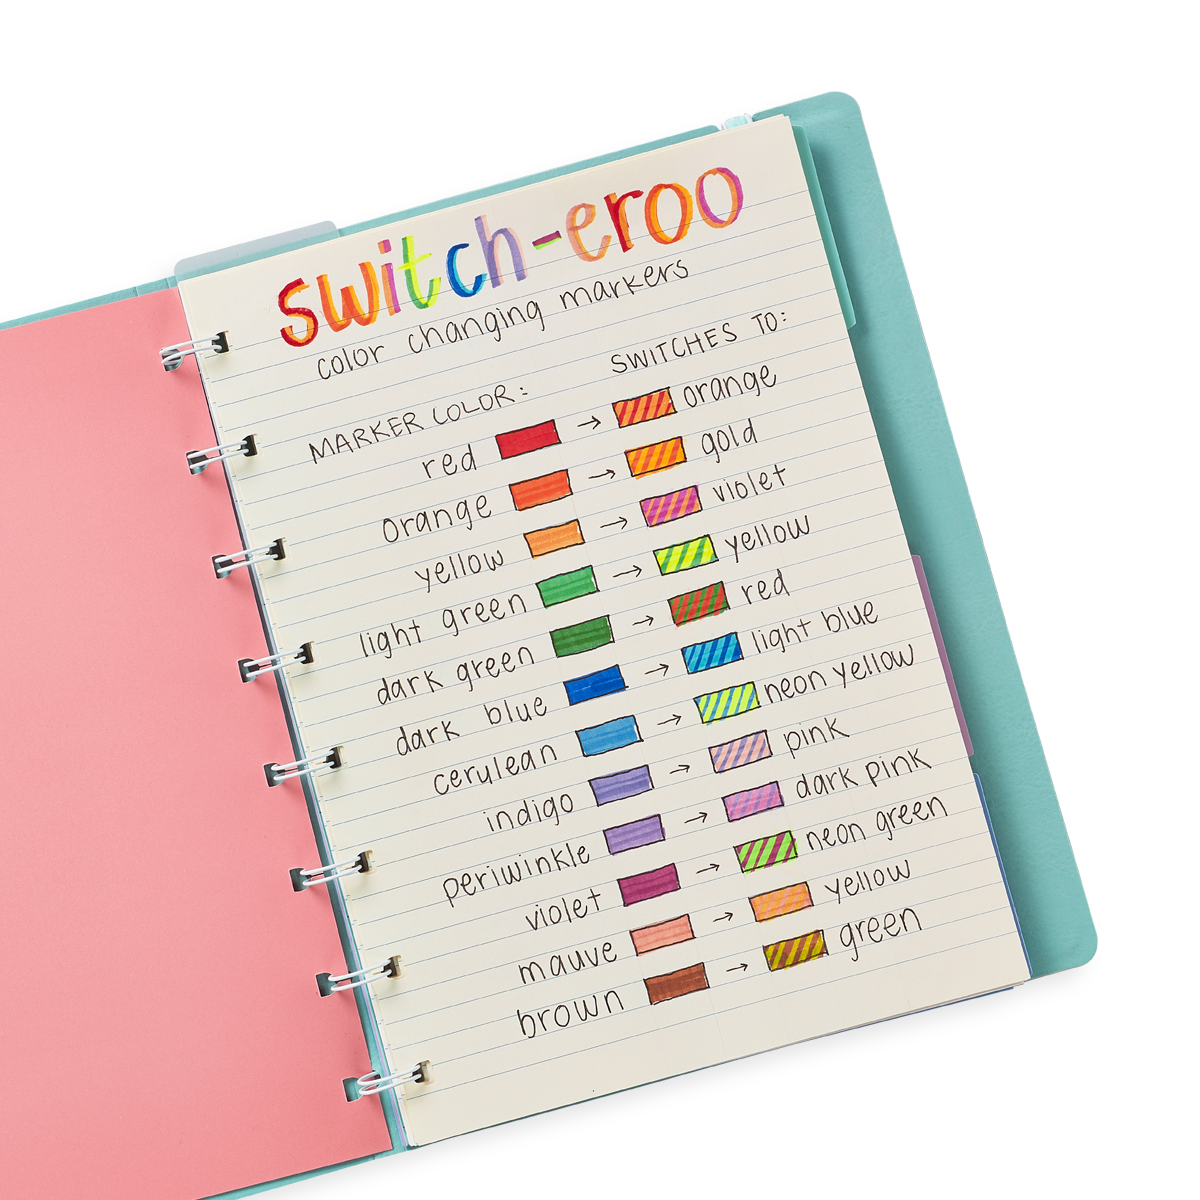 Switch-eroo Color Changing Markers in journal with swatches